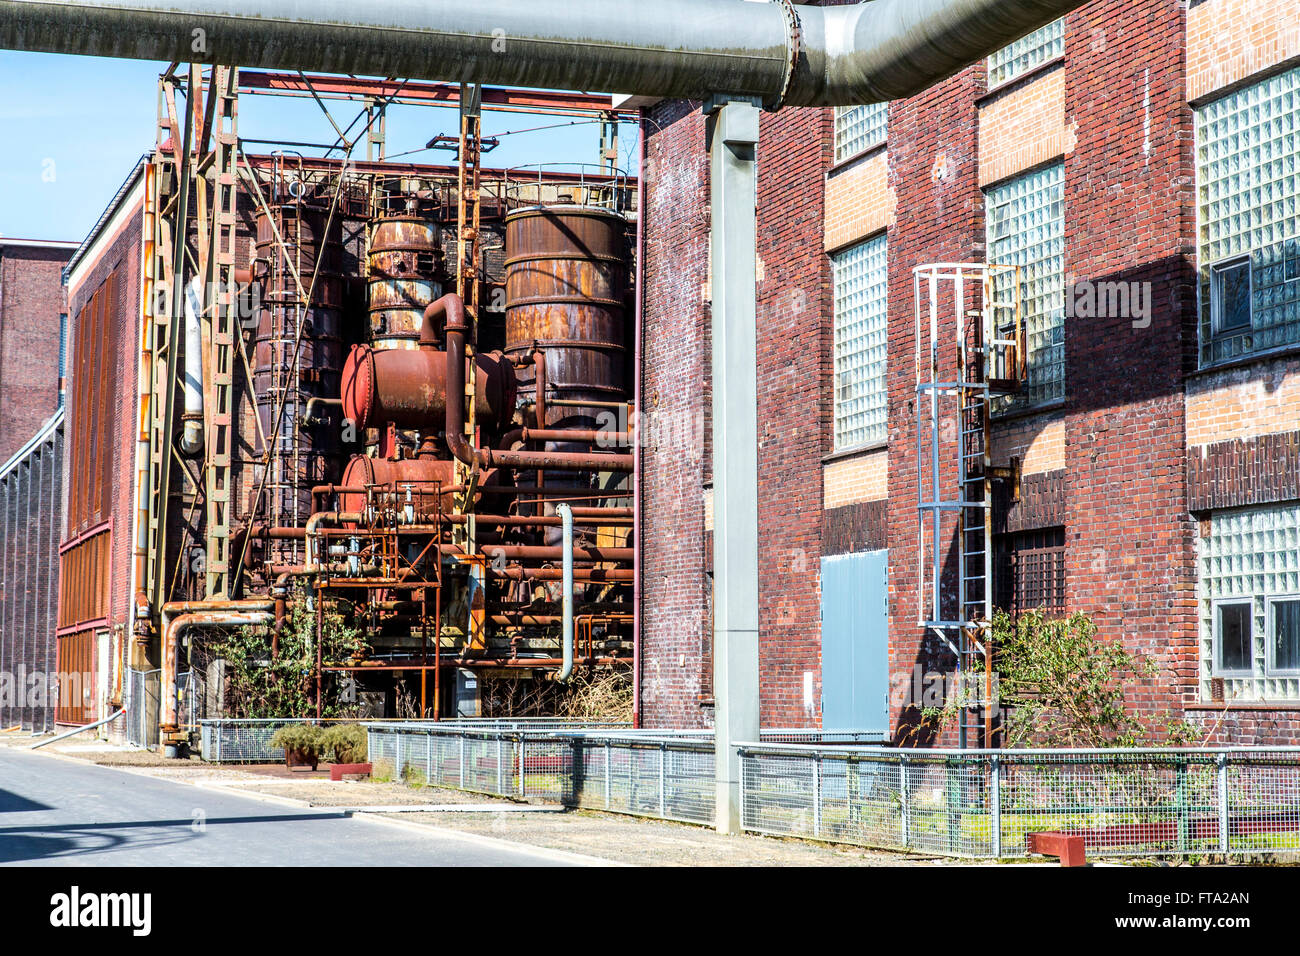 The Hansa coking plant in Dortmund, Germany, closed in 1992, today a museum, industrial monument, industrial heritage route Stock Photo